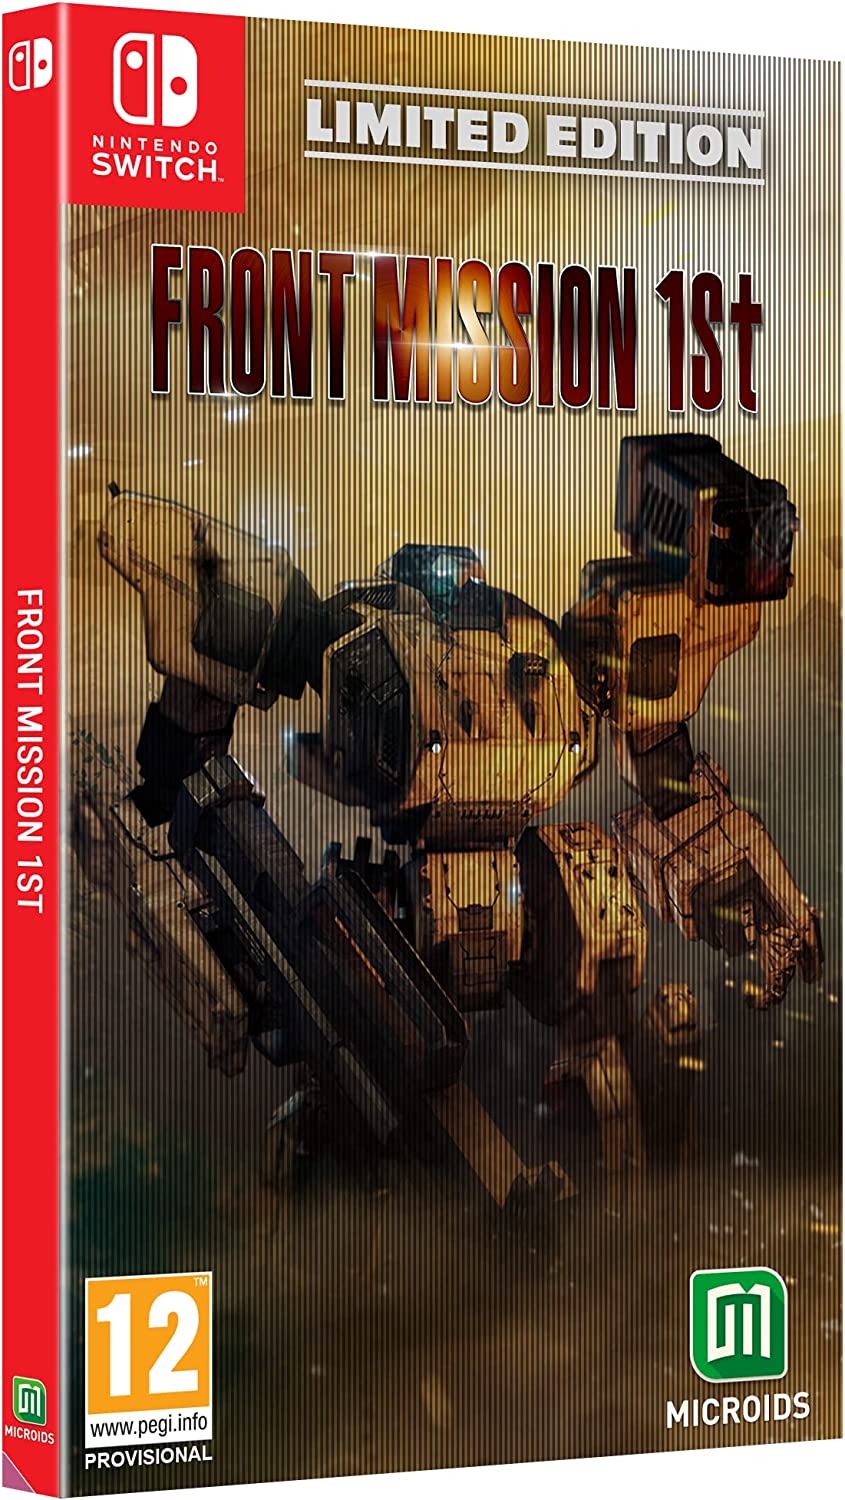 FRONT MISSION 1ST LIMITED EDITION